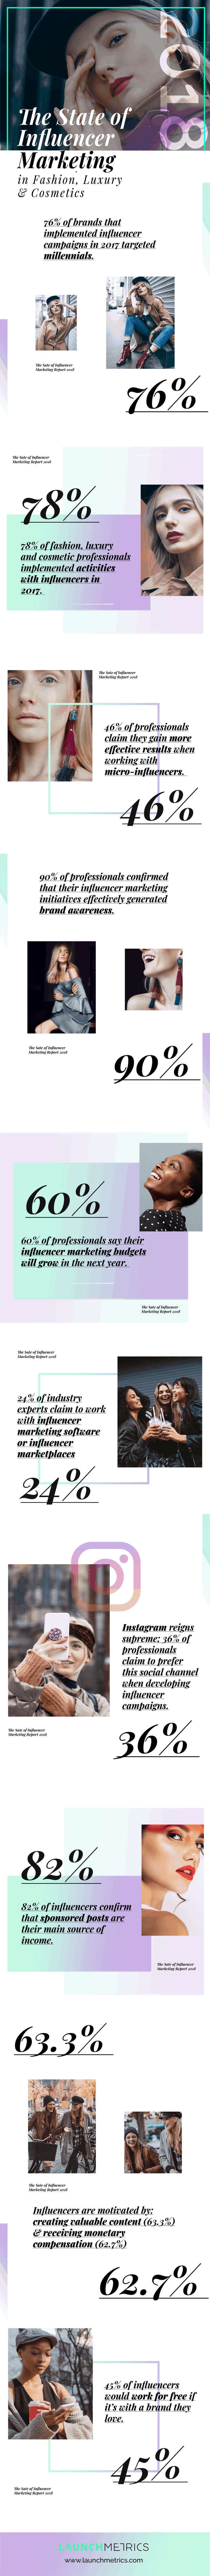 state-of-influencer-marketing_infographic-EN